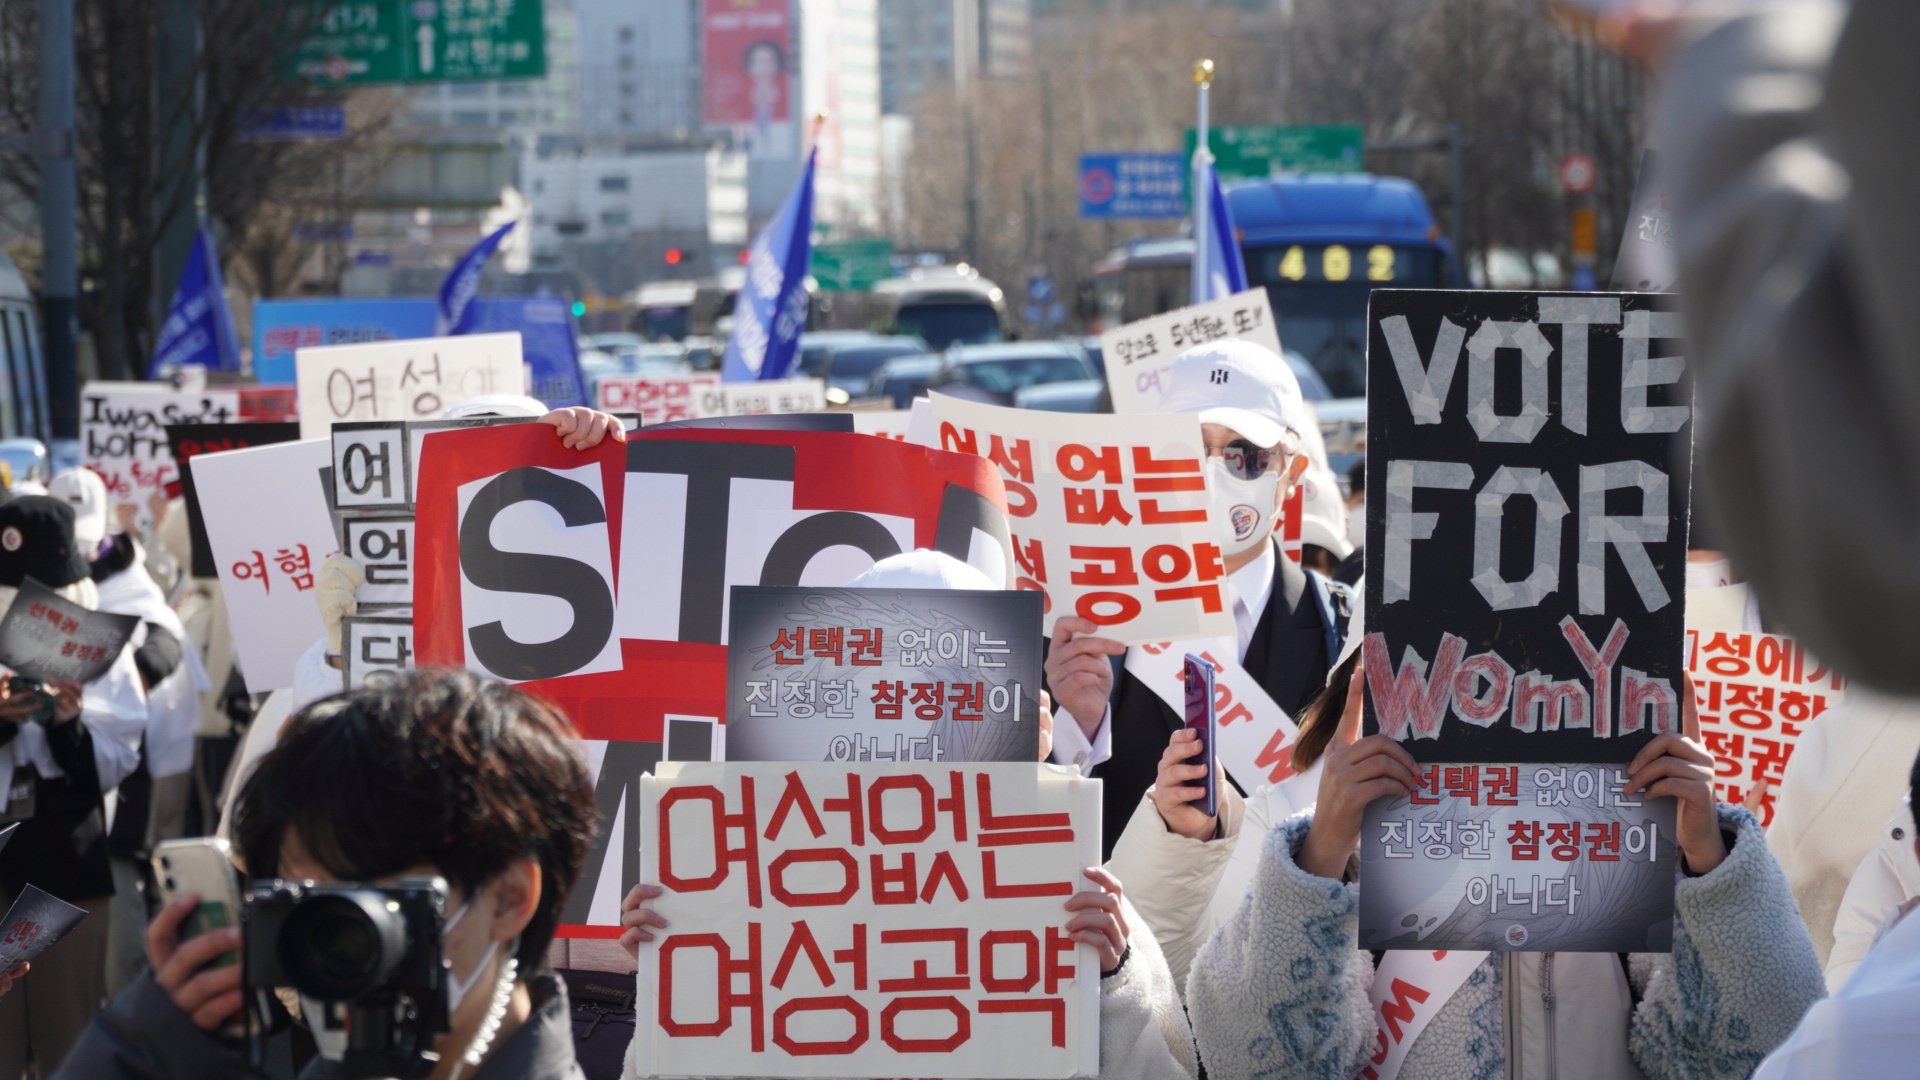 A rally in central Seoul organised by the women’s rights activist group Hae-il. Photo: Handout